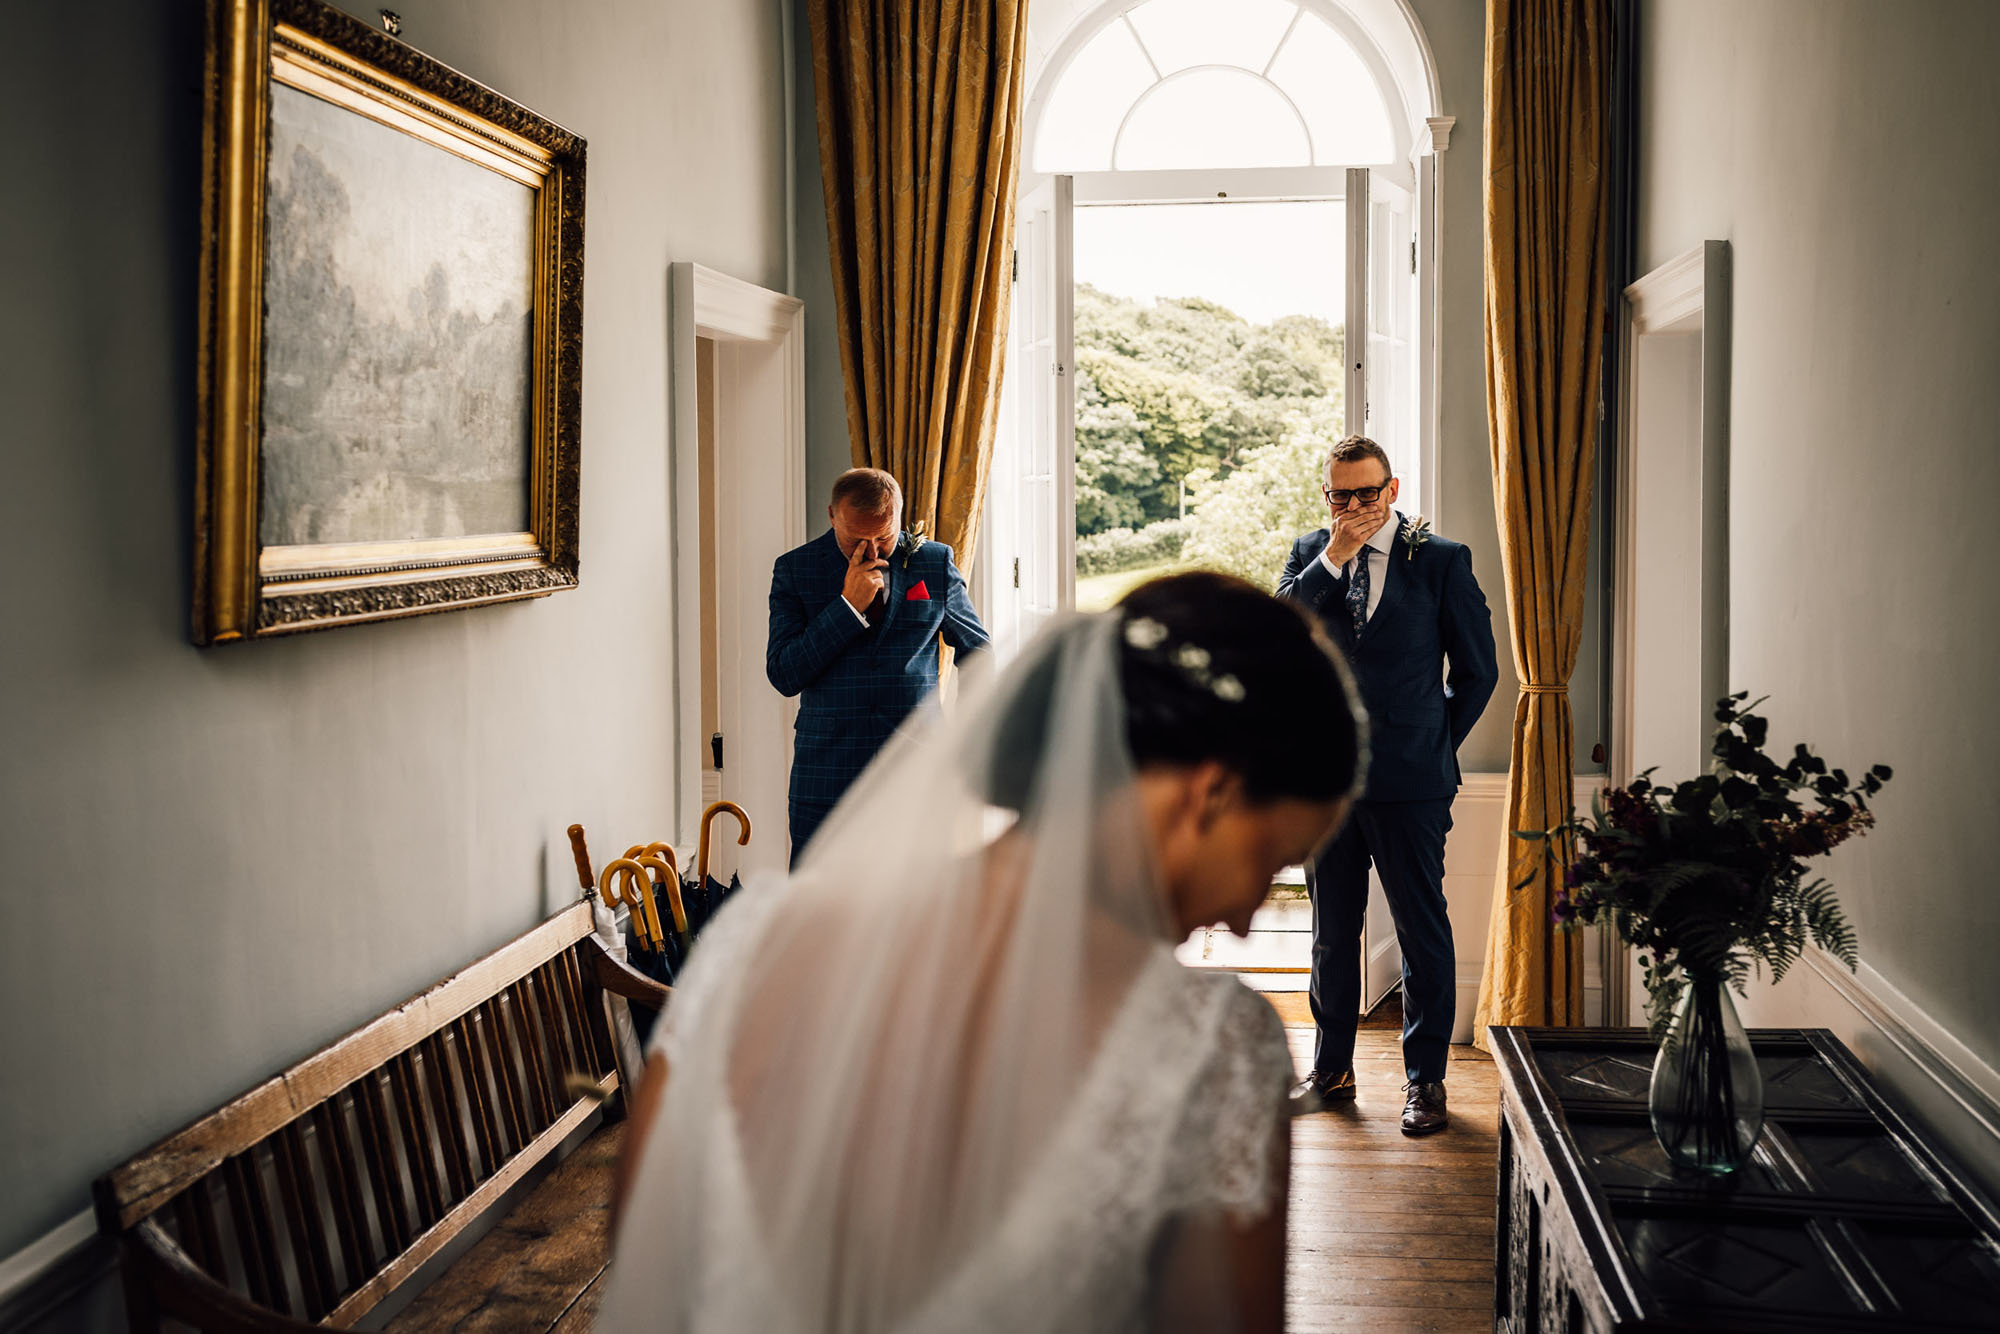 A bride's family who could be her dad and brother are overcome with emotion as they see her in her dress for the first time. By Chris Armstrong Photography in Cornwall